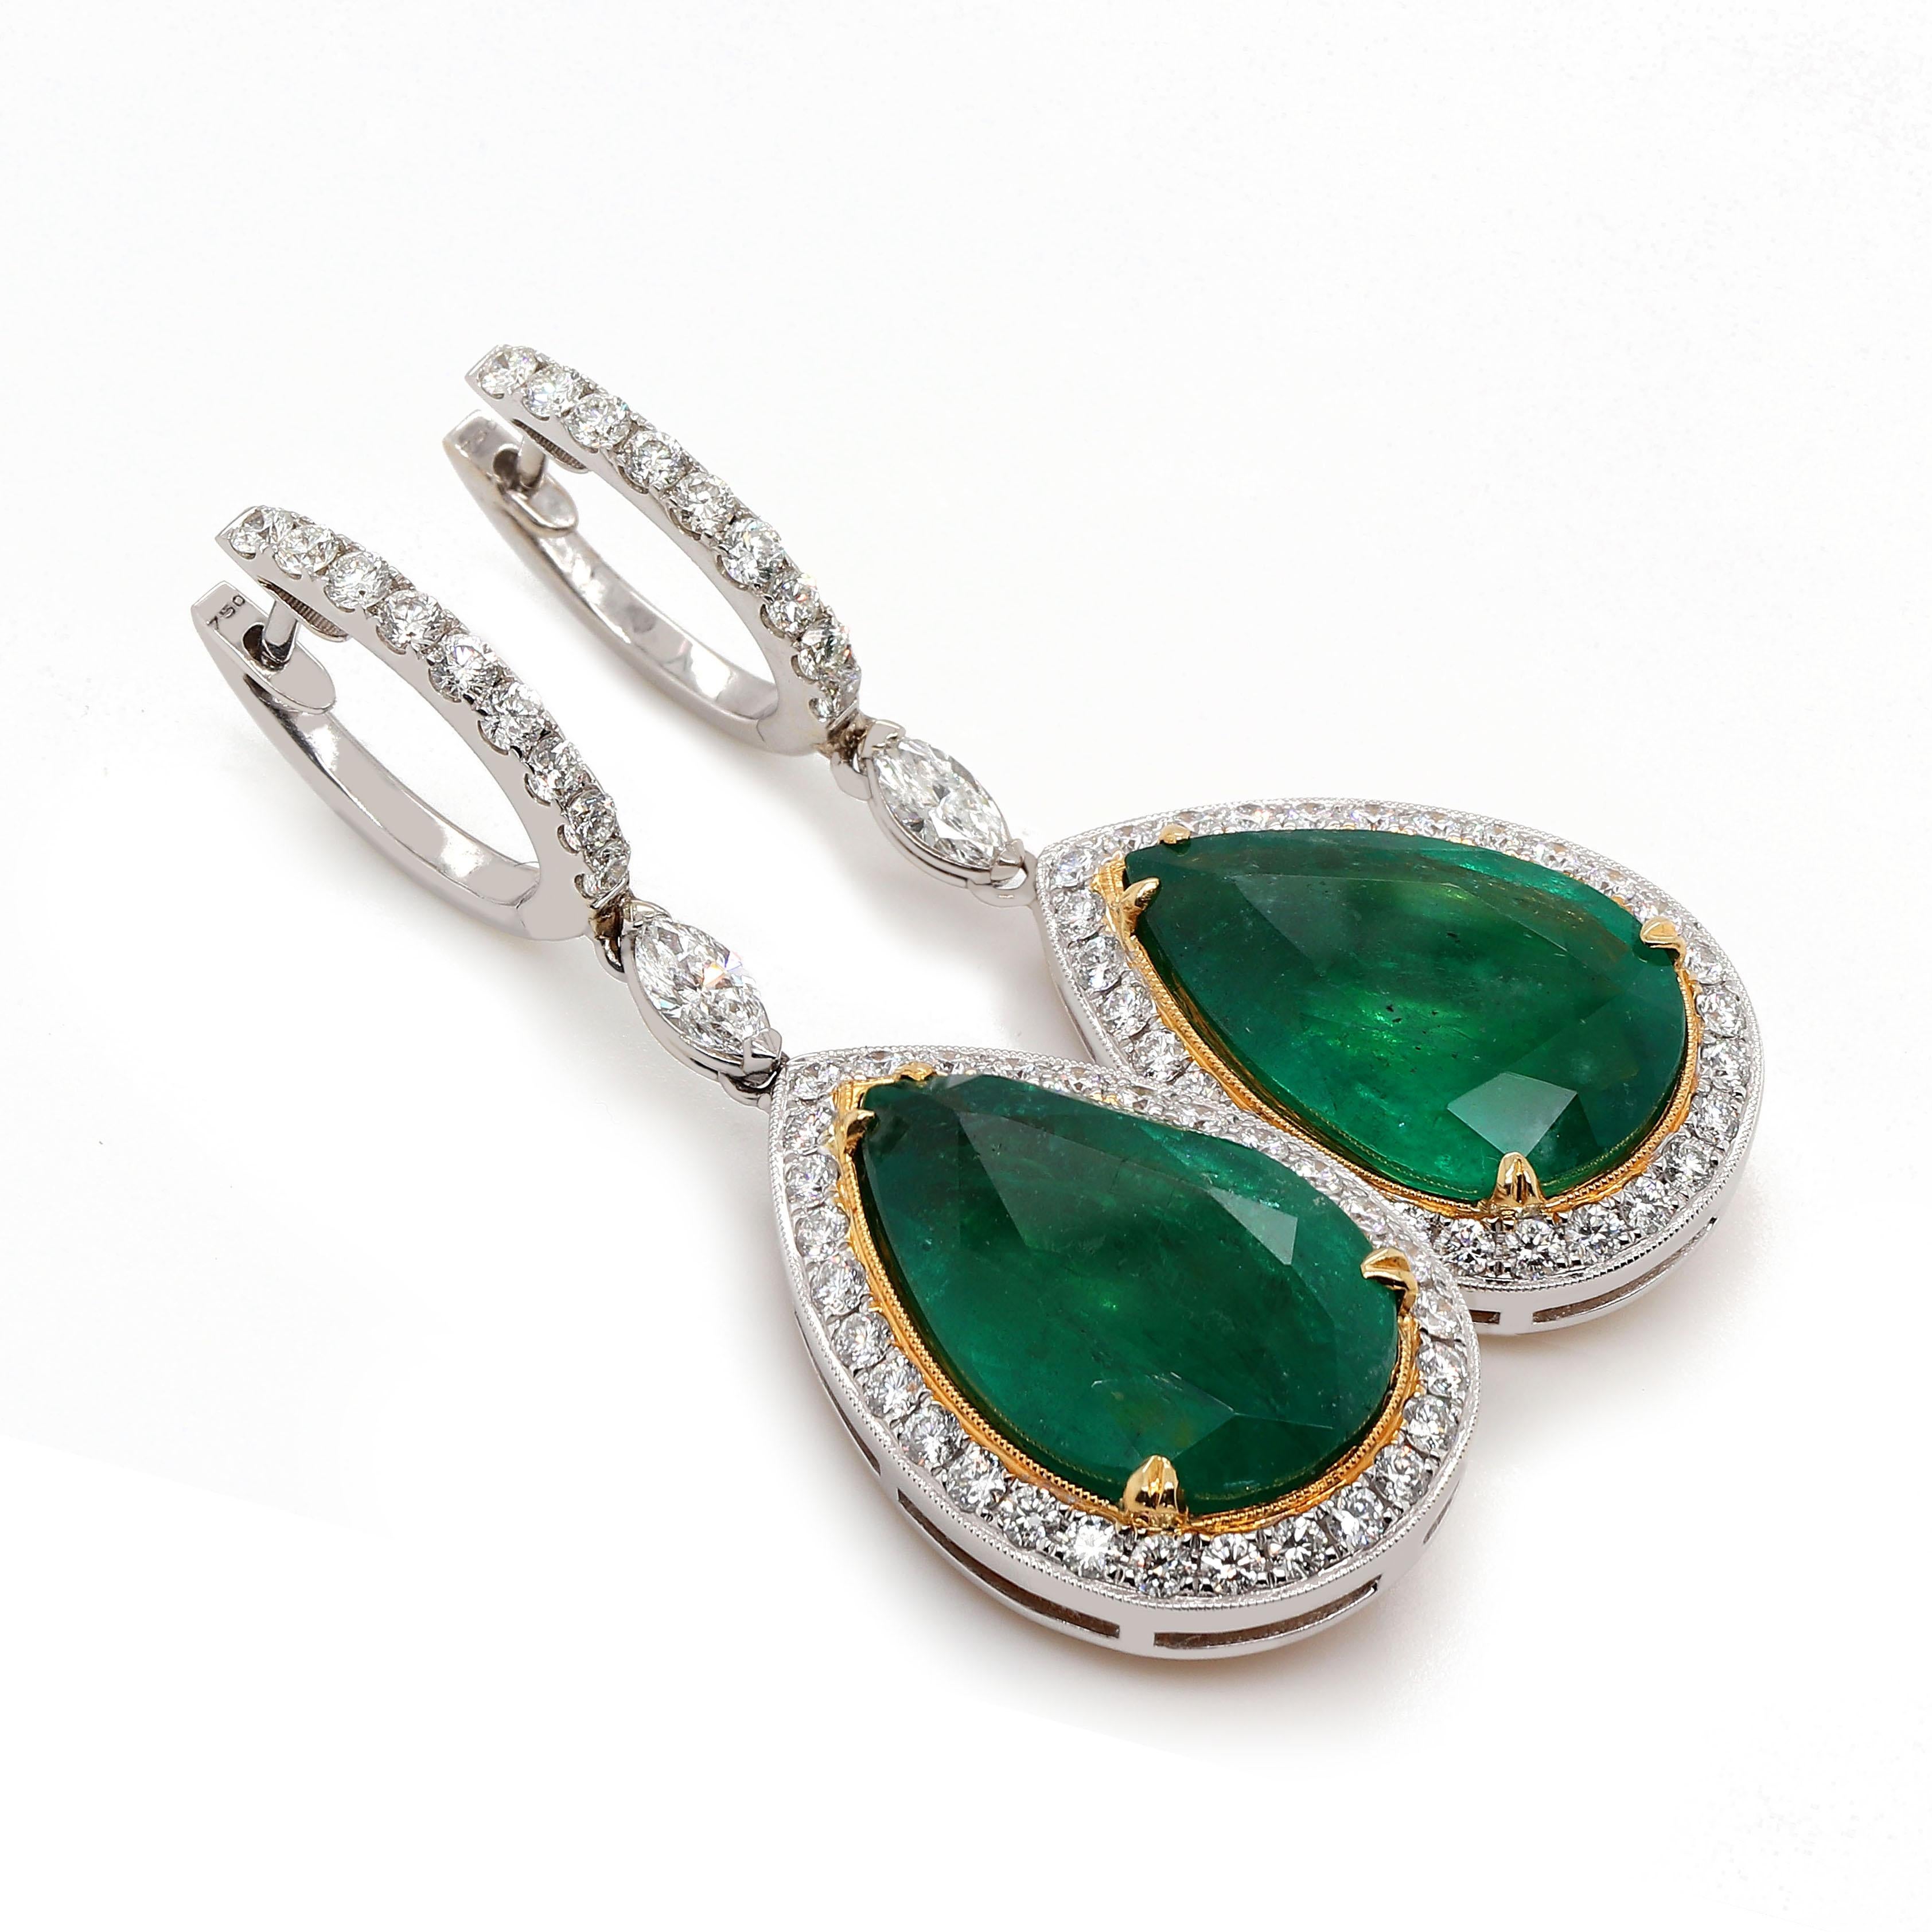 Emerald earrings containing 2 Fine GIA certified pear shape emeralds of about 16.17 carats (7.69ct 17.35x11.34x6.71mm and 8.47ct 17.29x11.31x7.19mm). Emeralds are surrounded by 60 round diamonds of about 1.27 carats and 2 marquise diamonds of about